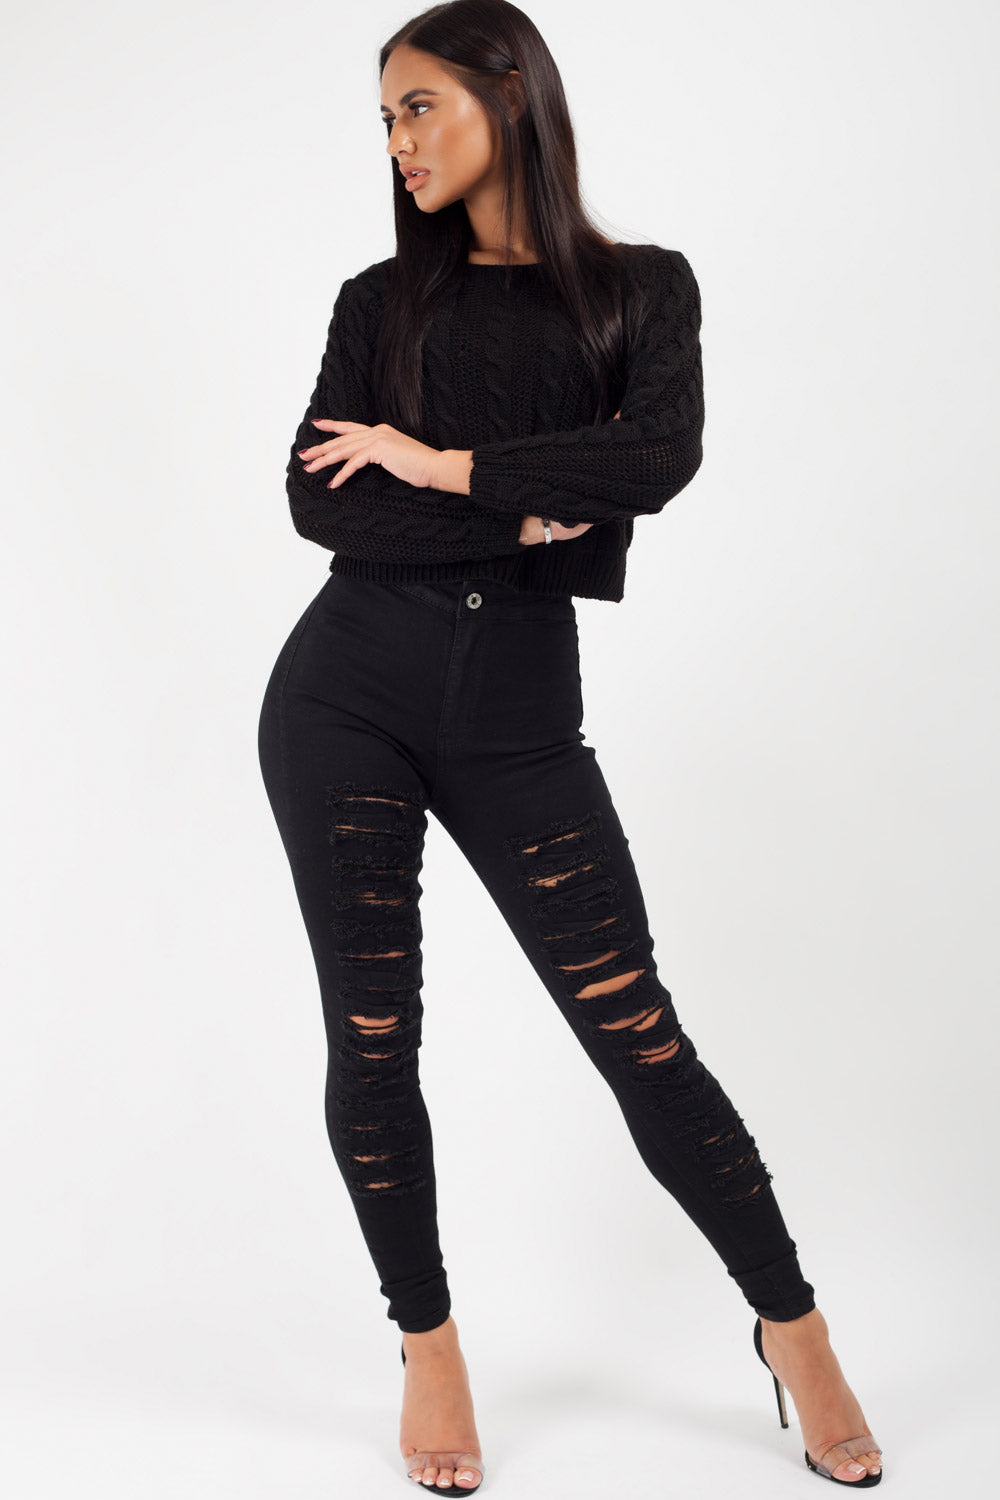 Womens Black Ripped Skinny Jeans High Waisted – Styledup.co.uk